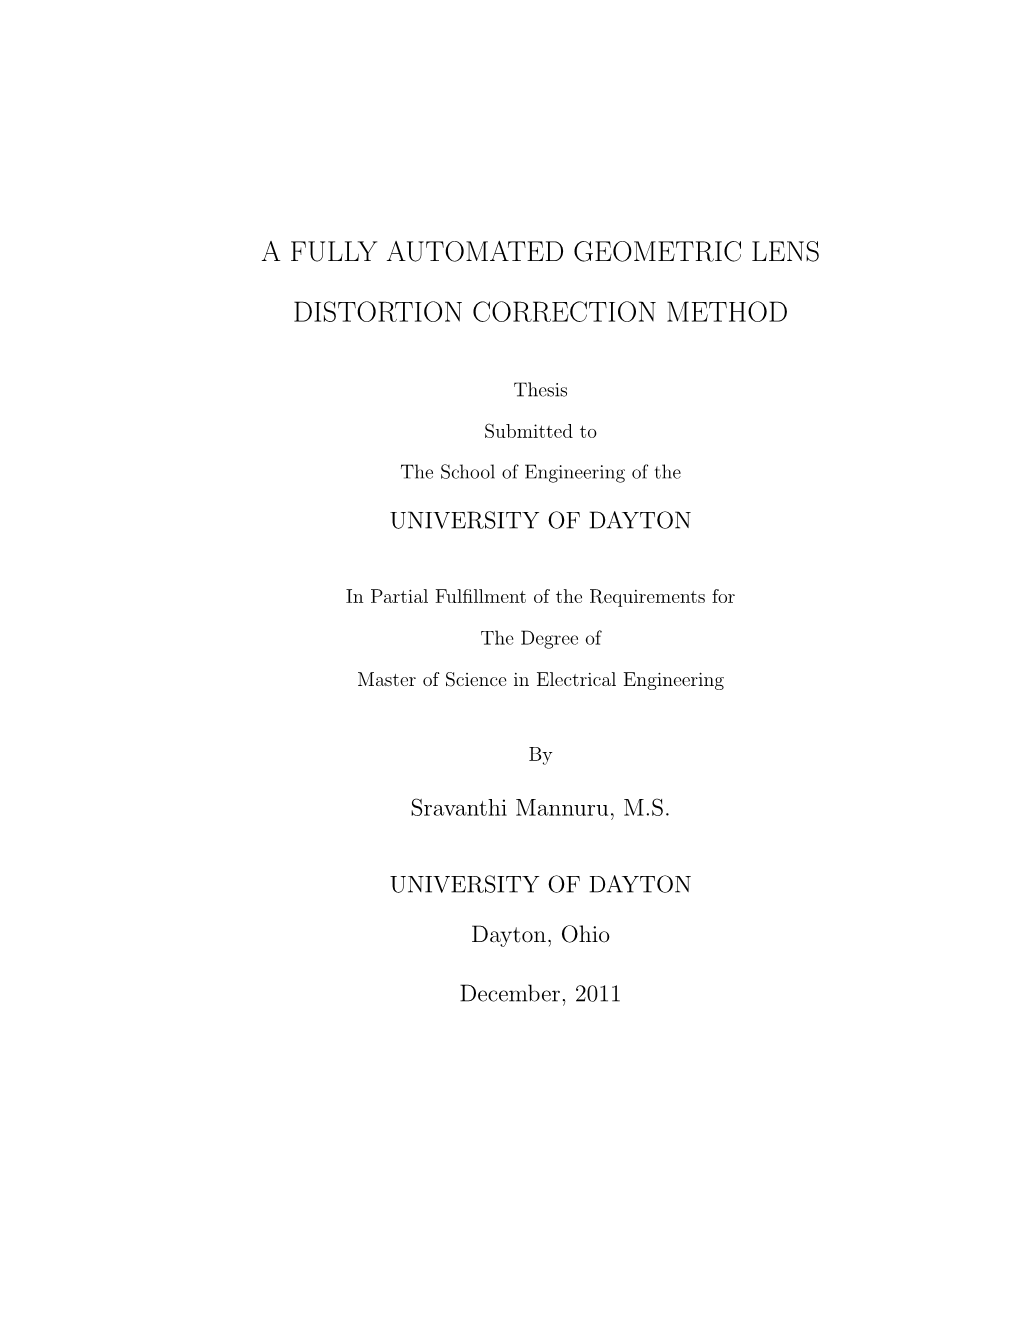 A Fully Automated Geometric Lens Distortion Correction Method